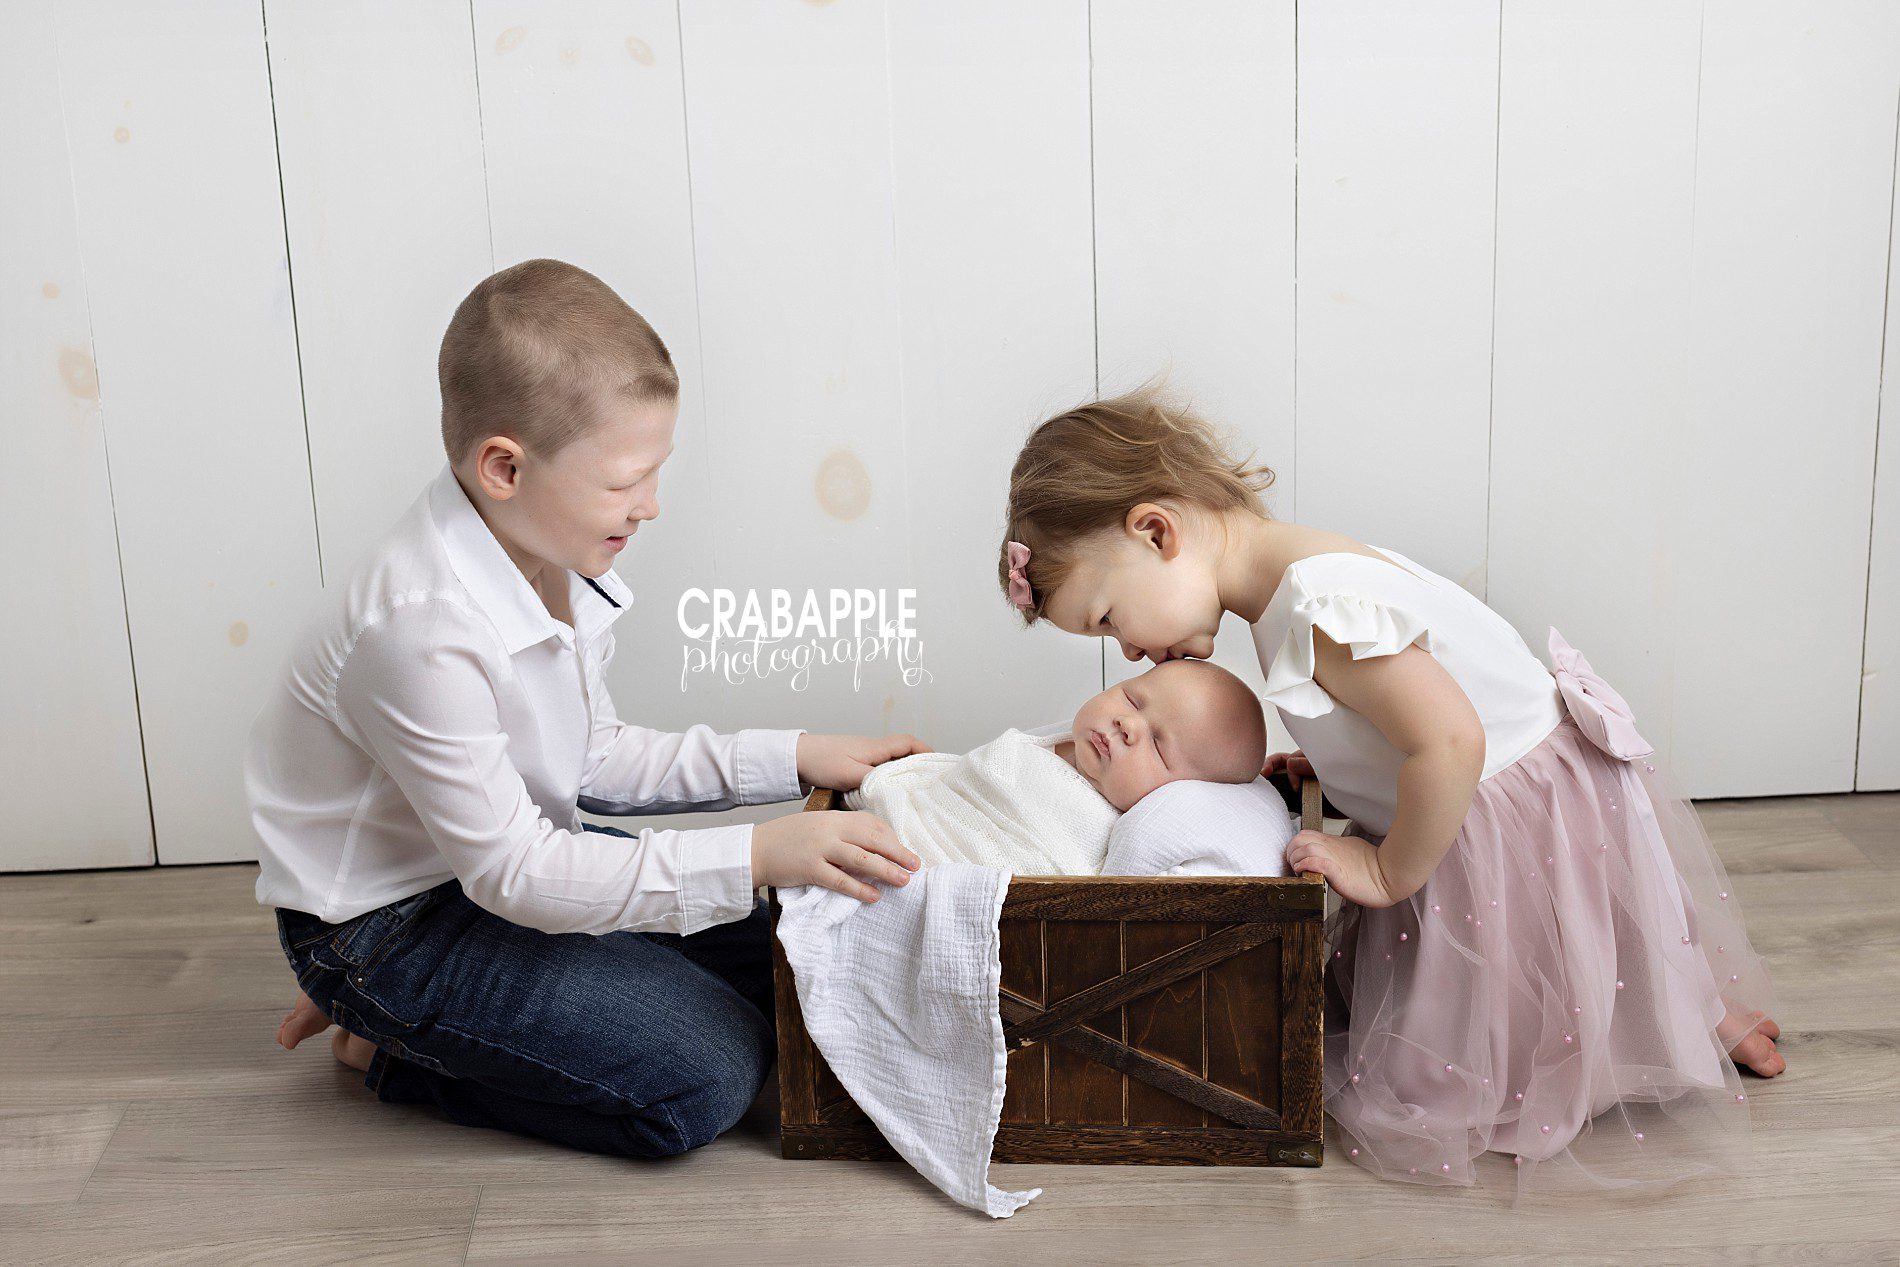 Sibling pose ideas for newborn photos